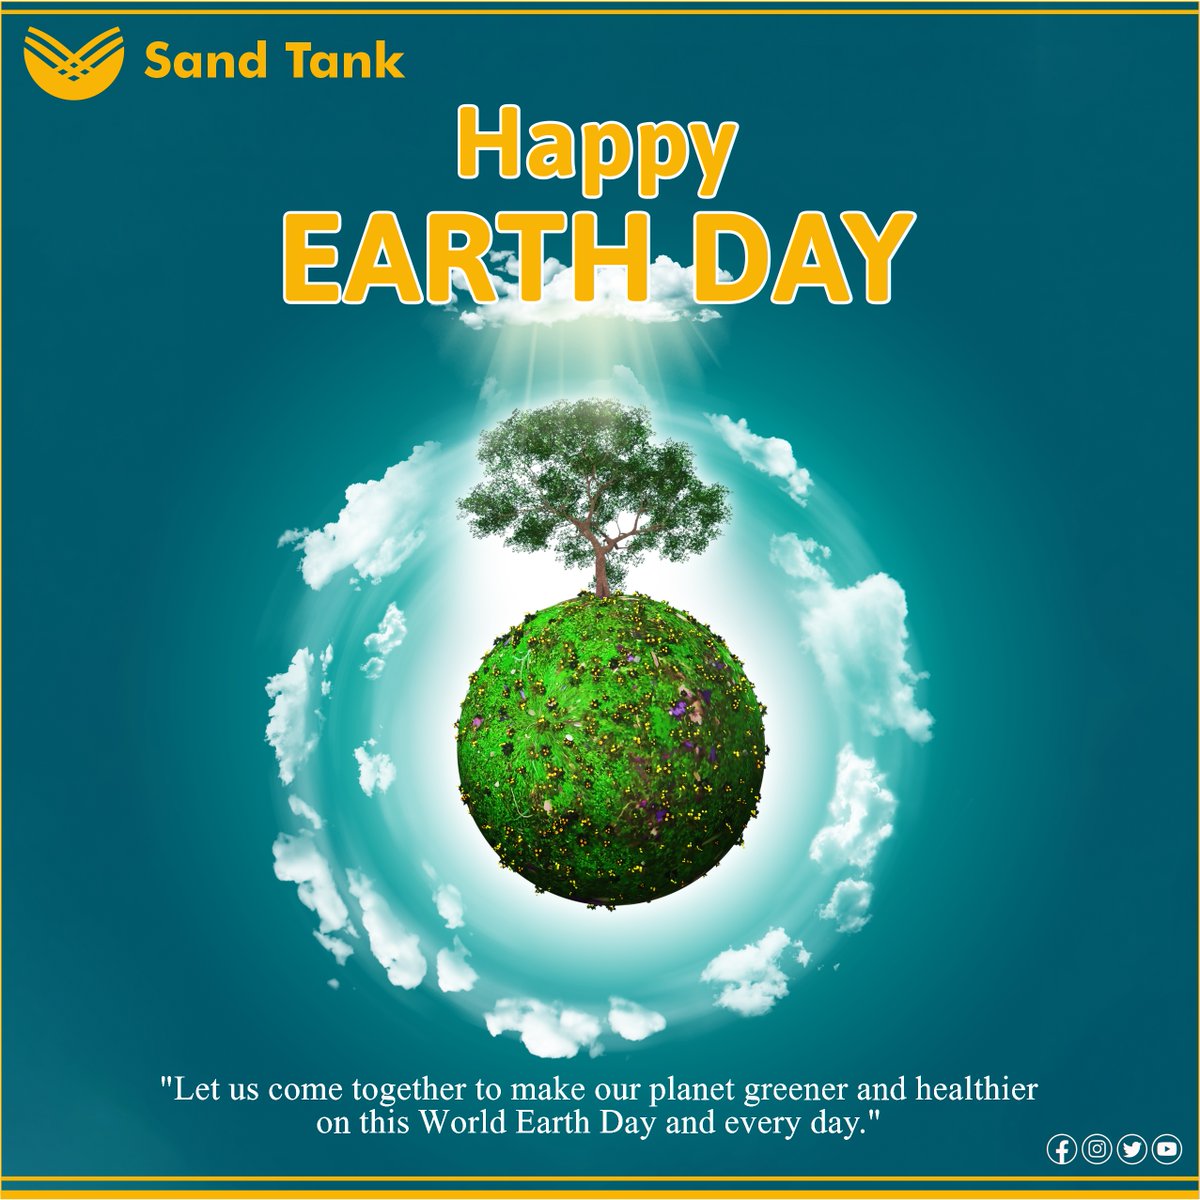 As we commemorate Earth Day, let's remember that every small action counts in the fight against environmental degradation. Let's be mindful of our impact on the planet. 🌿💧

#Sandtankfoundation #EarthDay #ProtectOurPlanet #EarthDay2024 #SaveTheEarth #GoGreen